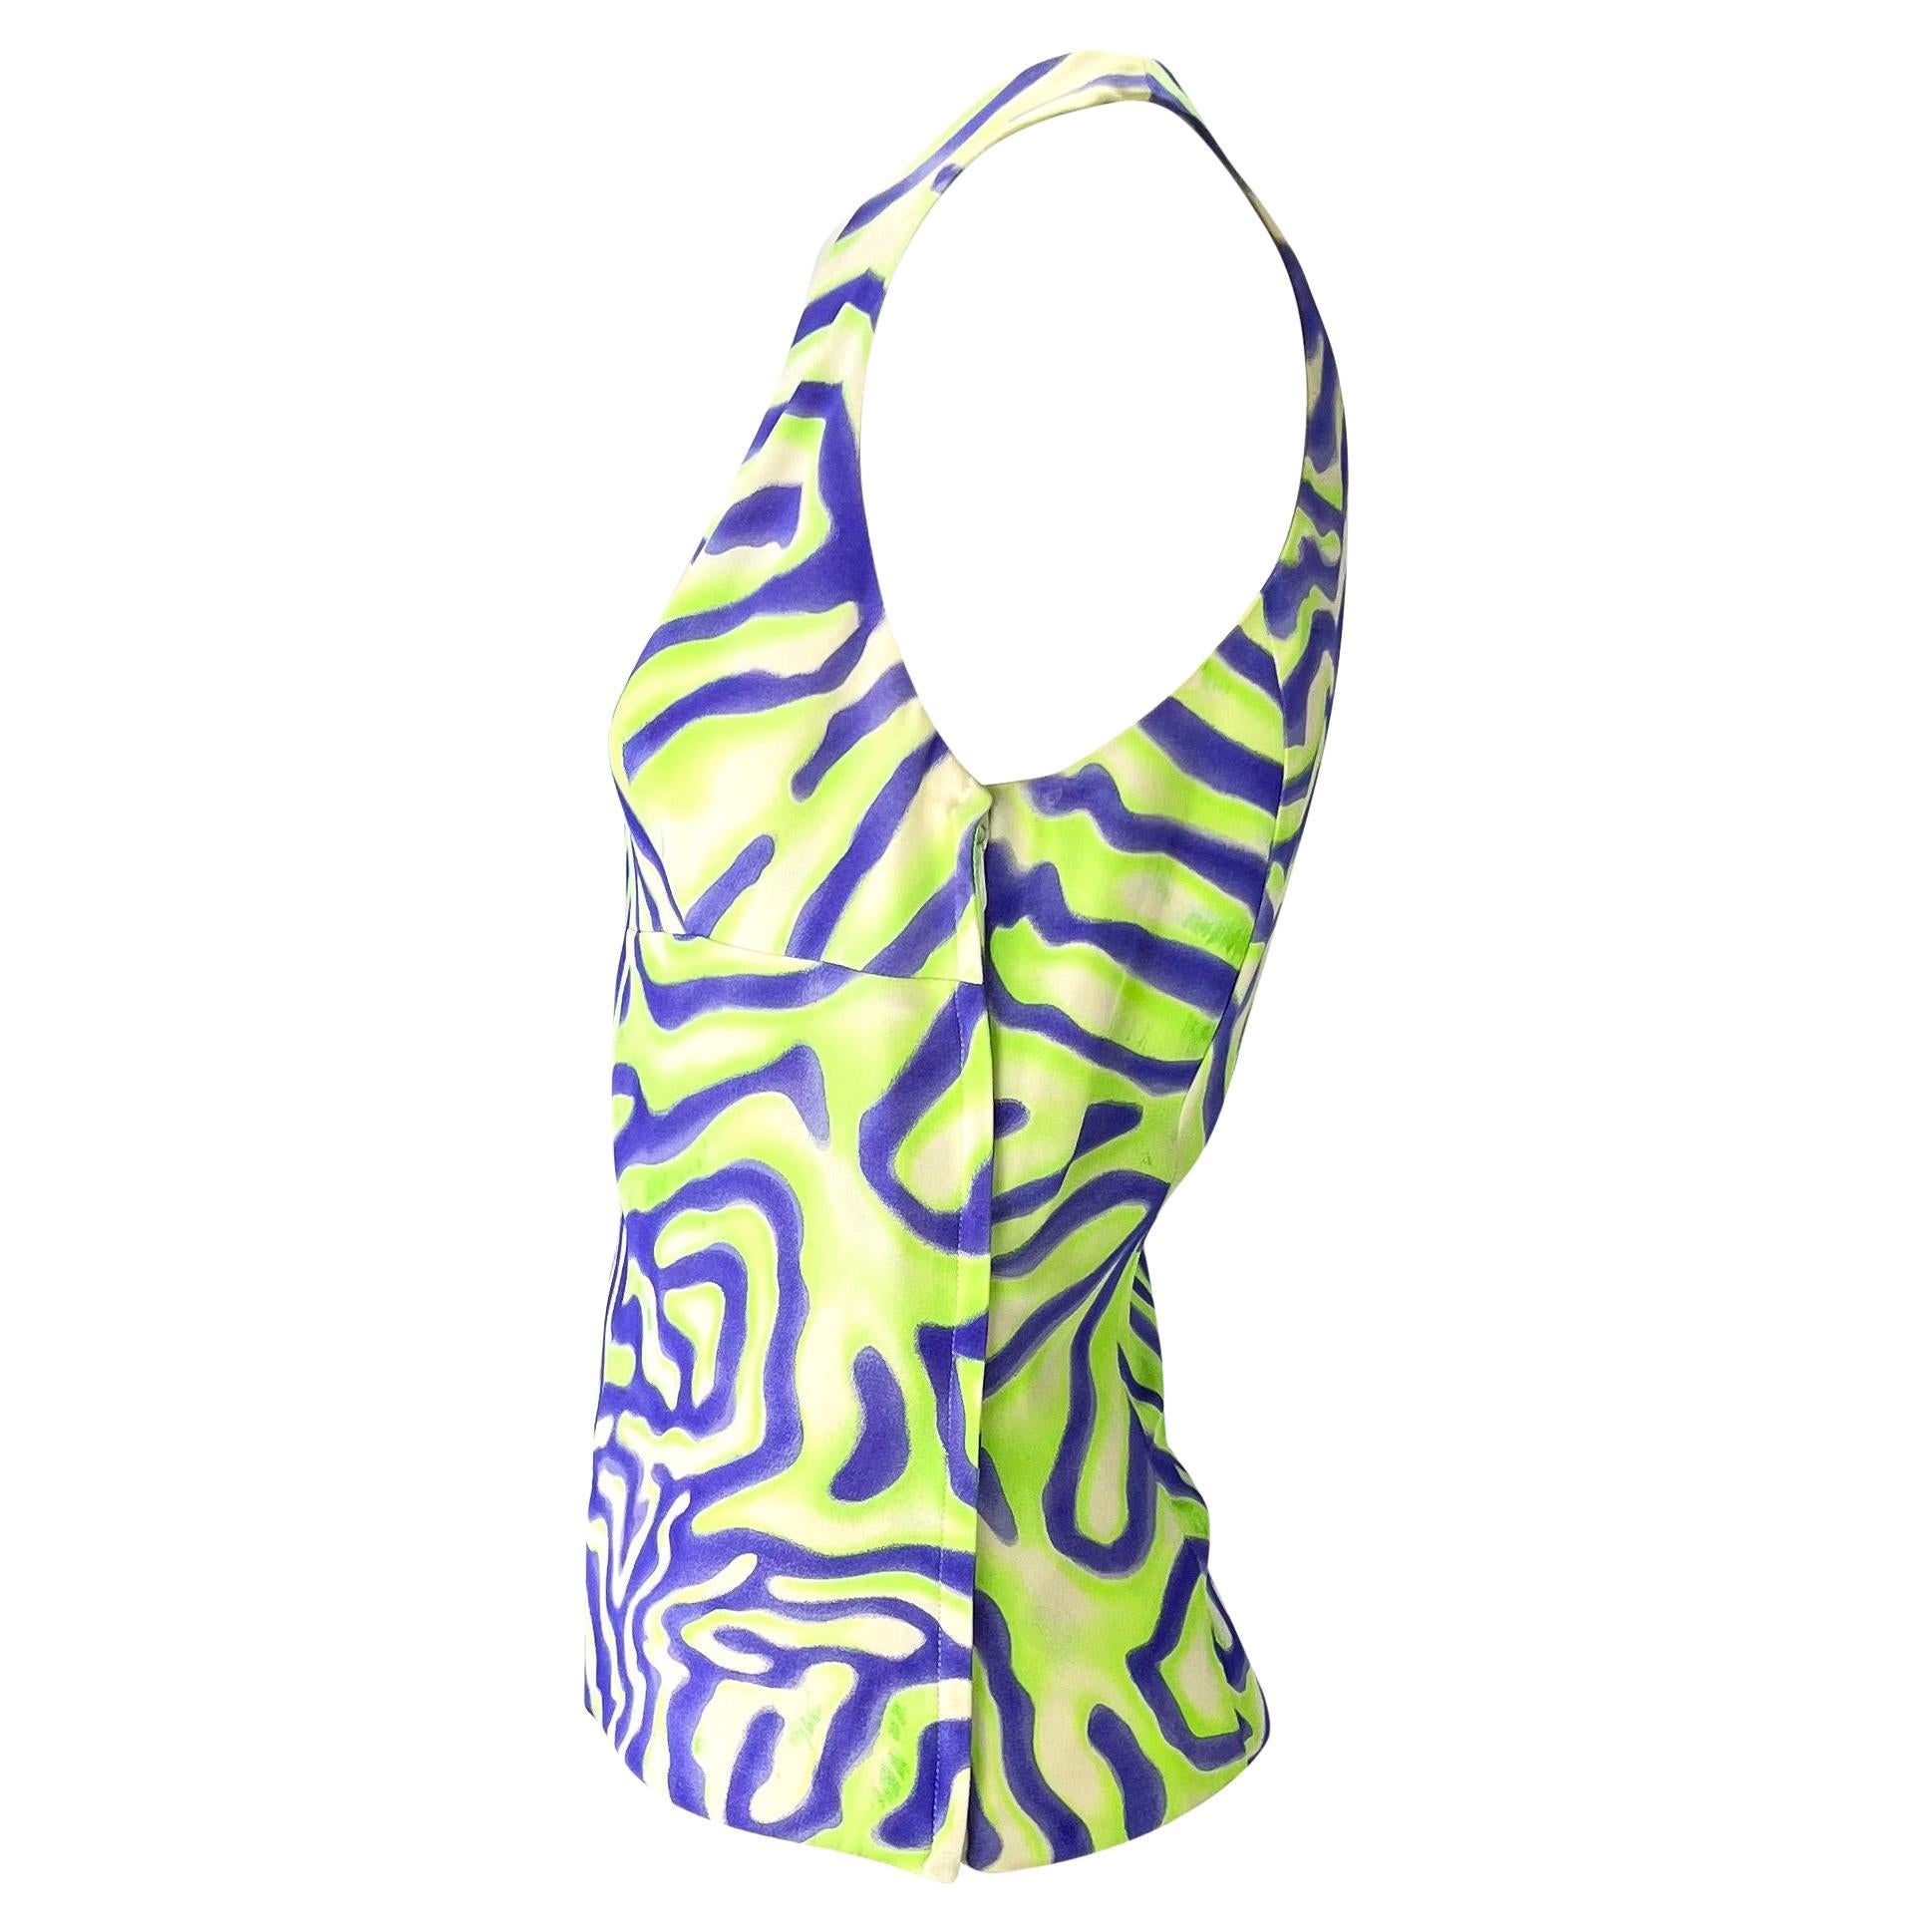 Presenting a vibrant purple and green sleeveless Gianni Versace Couture top, designed by Donatella Versace. From the Spring/Summer 2000 collection, this silk top features a deep angular neckline and is covered in an abstract tiger-like pattern. From